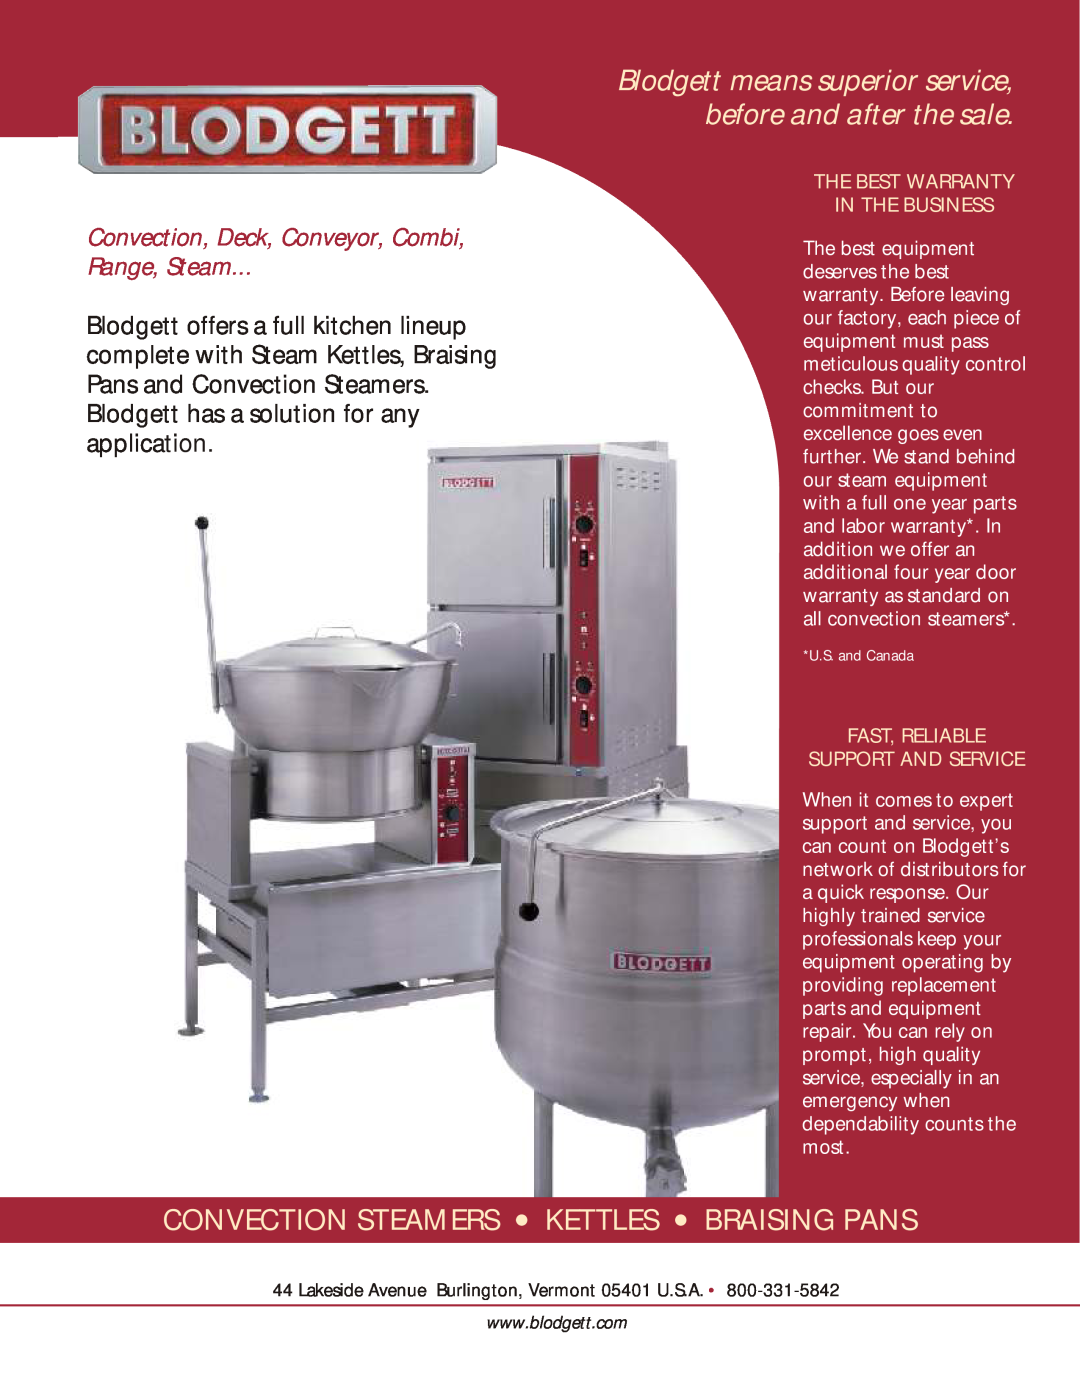 Blodgett CONVECTION STEAMERS KETTLES BRAISING PANS manual Blodgett means superior service, before and after the sale 